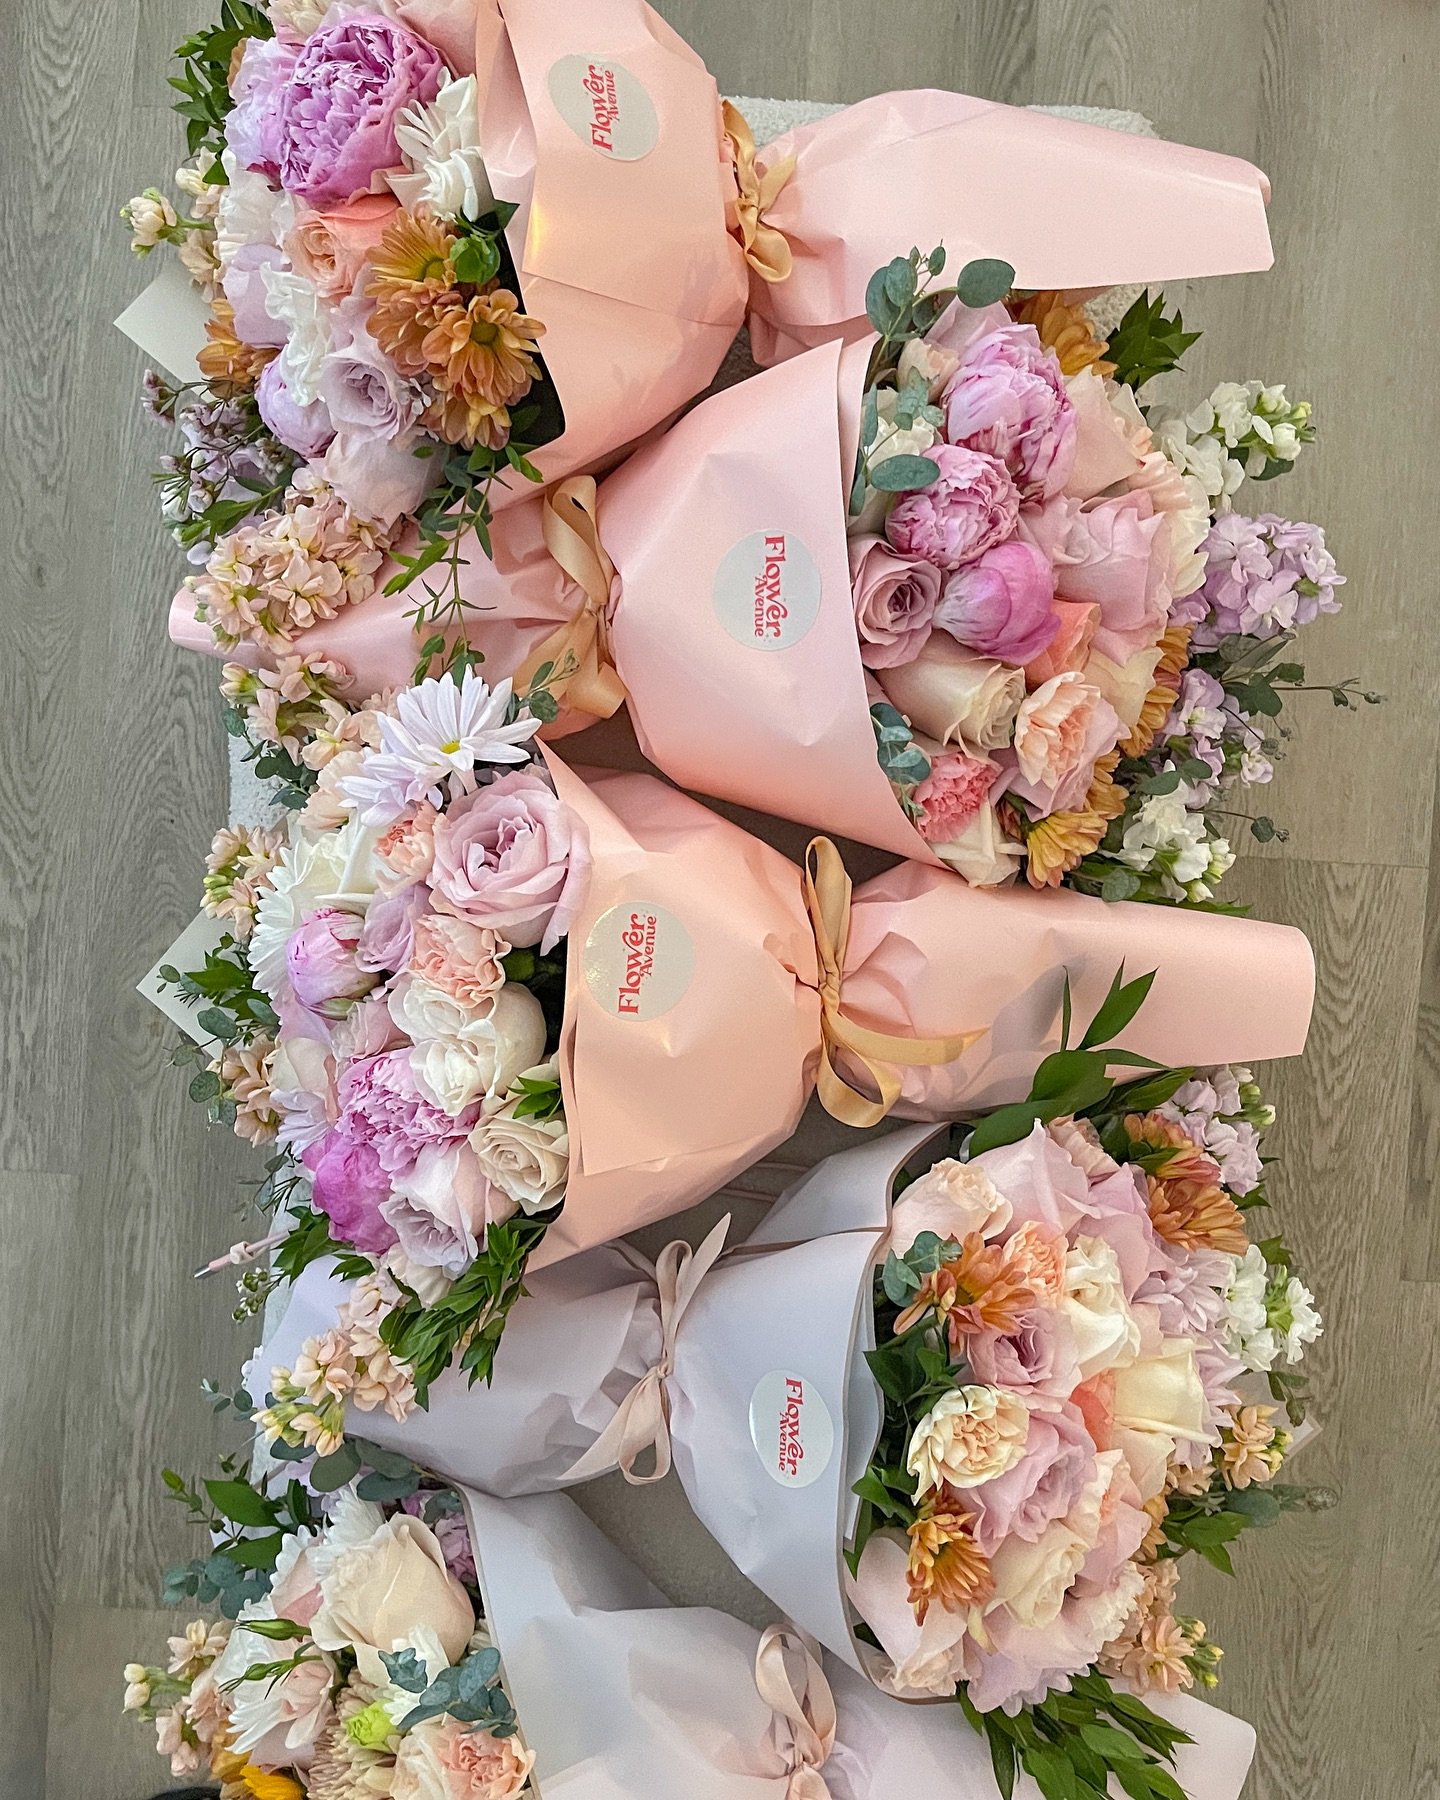 Speechless 🎀🫶🏼💕🌸
These wrapped bouquets are everything!💅🏼